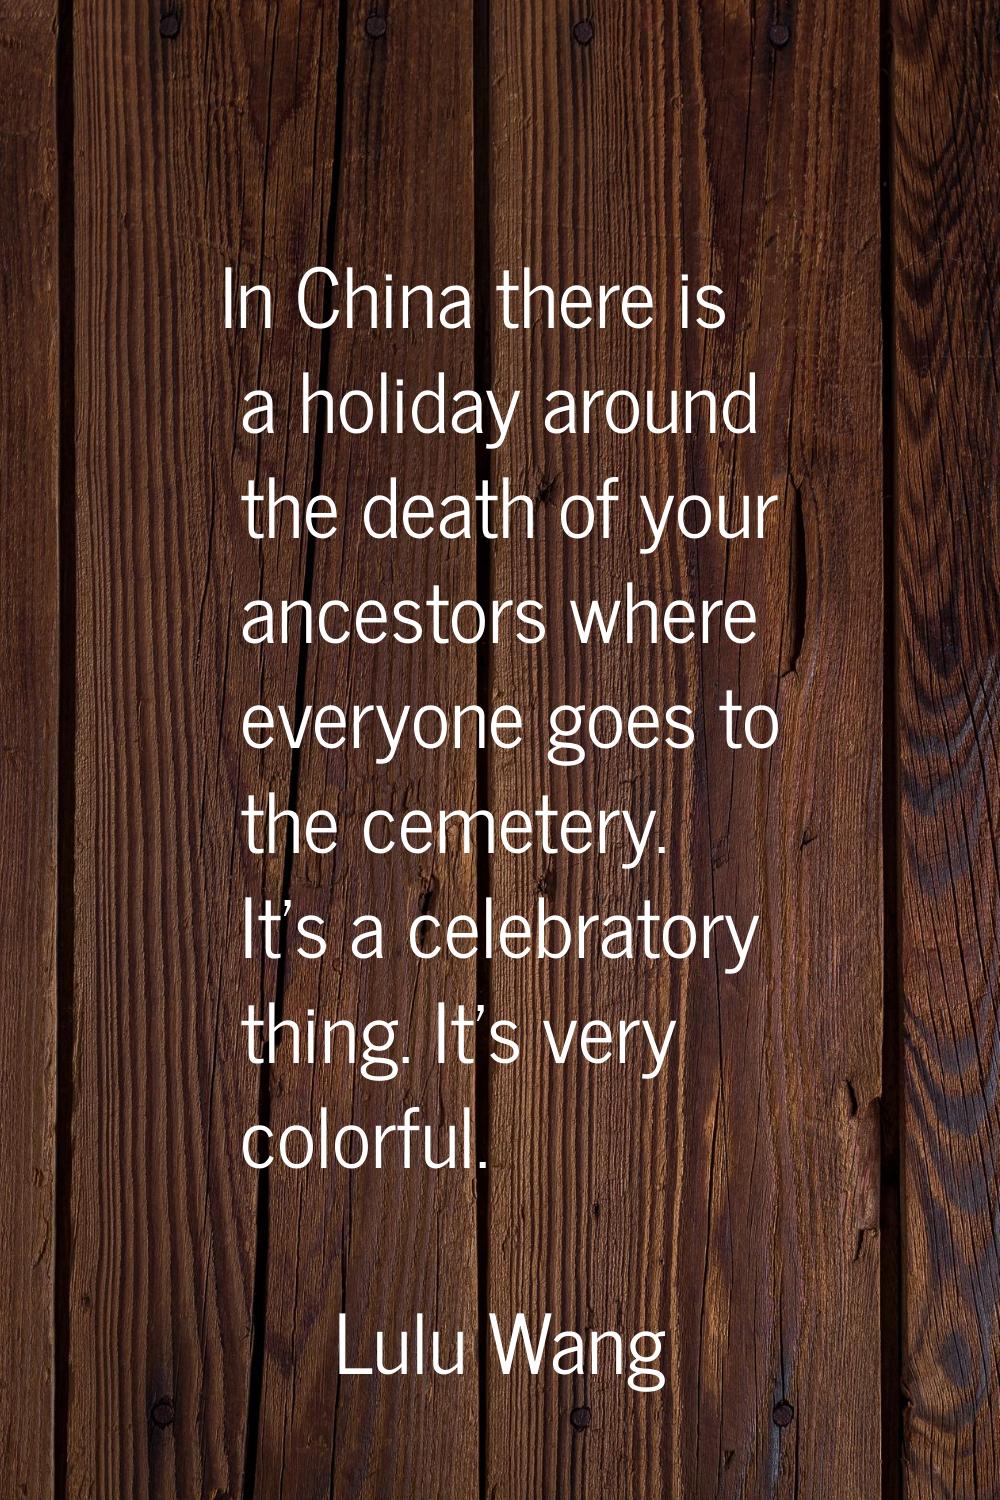 In China there is a holiday around the death of your ancestors where everyone goes to the cemetery.